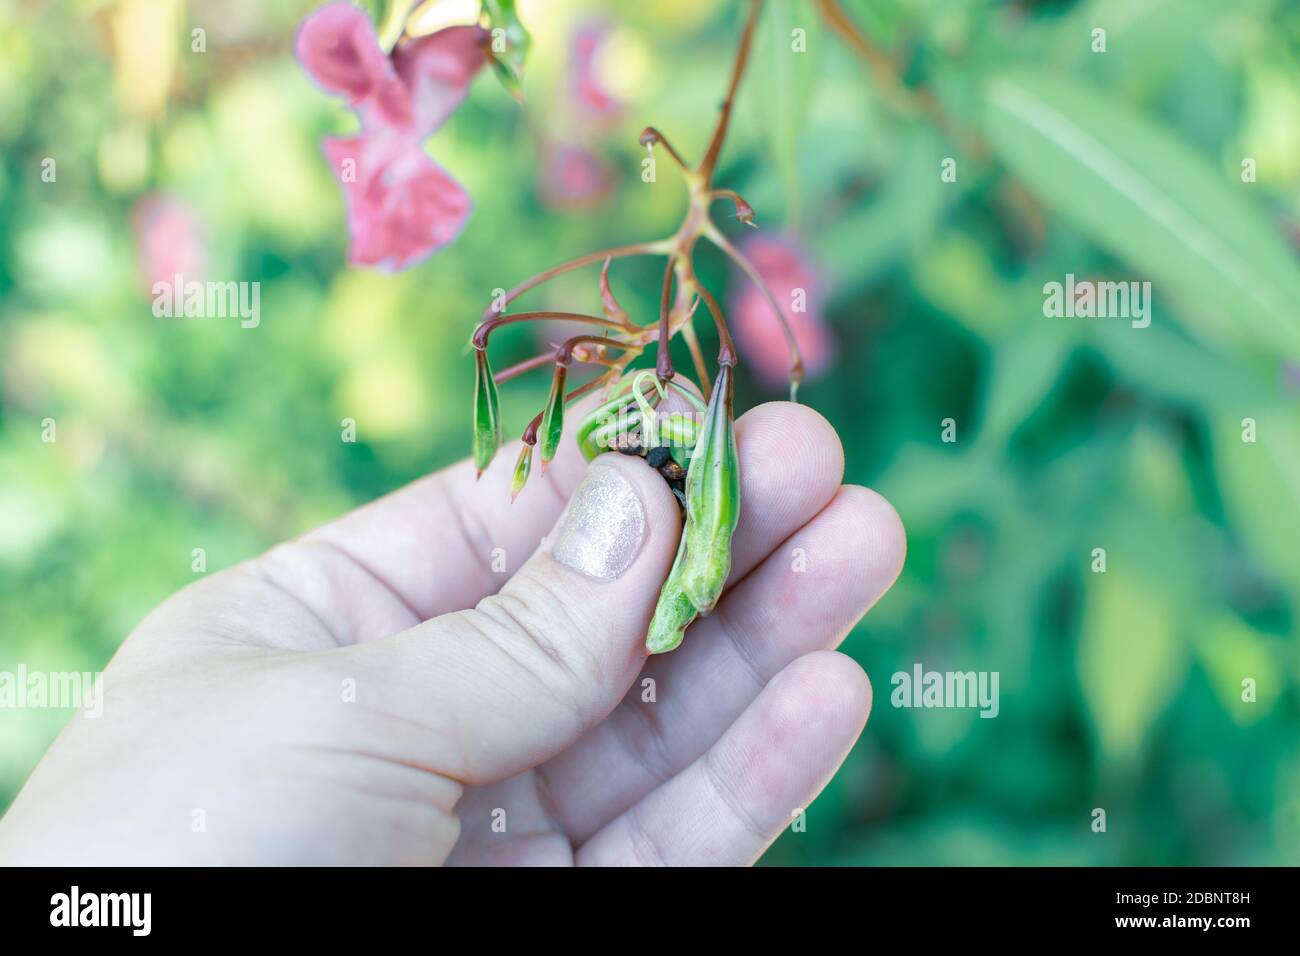 Himalayan balm seeds in hand close up photo. Policeman Helmet plant, Bobby Tops, Invasive asian plant species Stock Photo